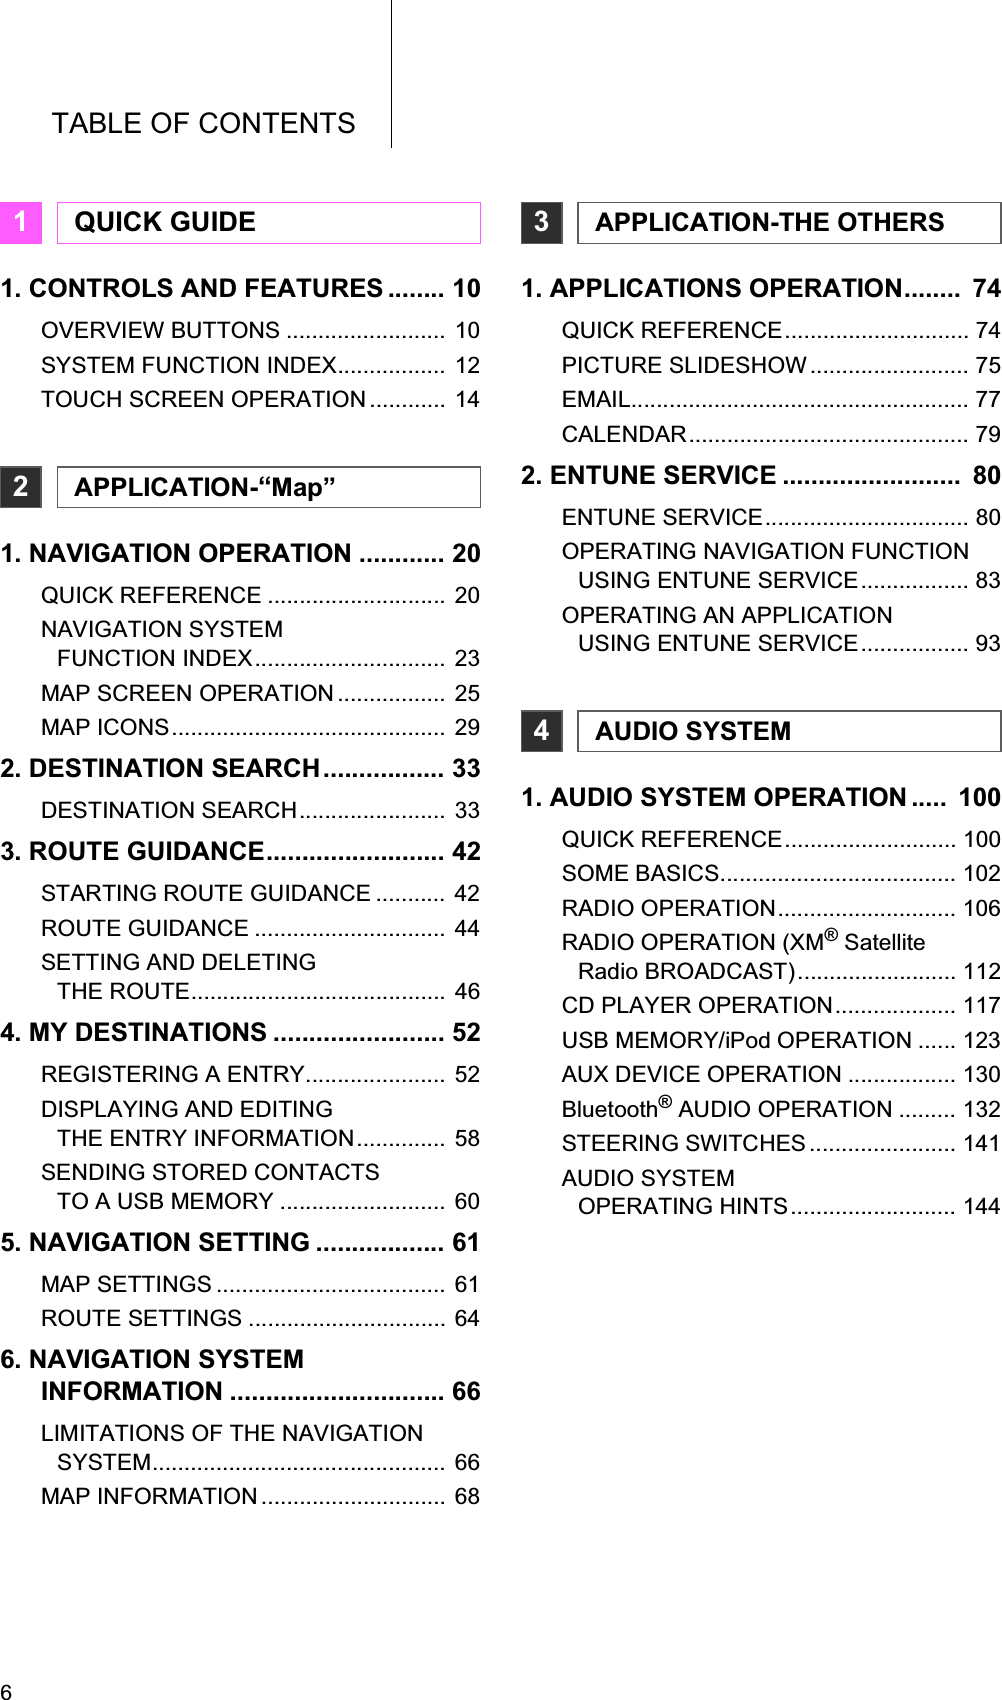 TABLE OF CONTENTS61. CONTROLS AND FEATURES ........ 10OVERVIEW BUTTONS .........................  10SYSTEM FUNCTION INDEX................. 12TOUCH SCREEN OPERATION............ 141. NAVIGATION OPERATION ............ 20QUICK REFERENCE ............................ 20NAVIGATION SYSTEM FUNCTION INDEX.............................. 23MAP SCREEN OPERATION................. 25MAP ICONS........................................... 292. DESTINATION SEARCH................. 33DESTINATION SEARCH.......................  333. ROUTE GUIDANCE......................... 42STARTING ROUTE GUIDANCE ........... 42ROUTE GUIDANCE .............................. 44SETTING AND DELETING THE ROUTE........................................ 464. MY DESTINATIONS ........................ 52REGISTERING A ENTRY......................  52DISPLAYING AND EDITING THE ENTRY INFORMATION.............. 58SENDING STORED CONTACTS TO A USB MEMORY .......................... 605. NAVIGATION SETTING .................. 61MAP SETTINGS .................................... 61ROUTE SETTINGS ............................... 646. NAVIGATION SYSTEM INFORMATION .............................. 66LIMITATIONS OF THE NAVIGATION SYSTEM.............................................. 66MAP INFORMATION............................. 681. APPLICATIONS OPERATION........  74QUICK REFERENCE............................. 74PICTURE SLIDESHOW......................... 75EMAIL..................................................... 77CALENDAR............................................ 792. ENTUNE SERVICE .........................  80ENTUNE SERVICE................................ 80OPERATING NAVIGATION FUNCTION USING ENTUNE SERVICE................. 83OPERATING AN APPLICATION USING ENTUNE SERVICE................. 931. AUDIO SYSTEM OPERATION .....  100QUICK REFERENCE........................... 100SOME BASICS..................................... 102RADIO OPERATION............................ 106RADIO OPERATION (XM® Satellite Radio BROADCAST)......................... 112CD PLAYER OPERATION................... 117USB MEMORY/iPod OPERATION ...... 123AUX DEVICE OPERATION ................. 130Bluetooth® AUDIO OPERATION ......... 132STEERING SWITCHES ....................... 141AUDIO SYSTEM OPERATING HINTS.......................... 1441QUICK GUIDE2APPLICATION-“Map”3APPLICATION-THE OTHERS4AUDIO SYSTEM